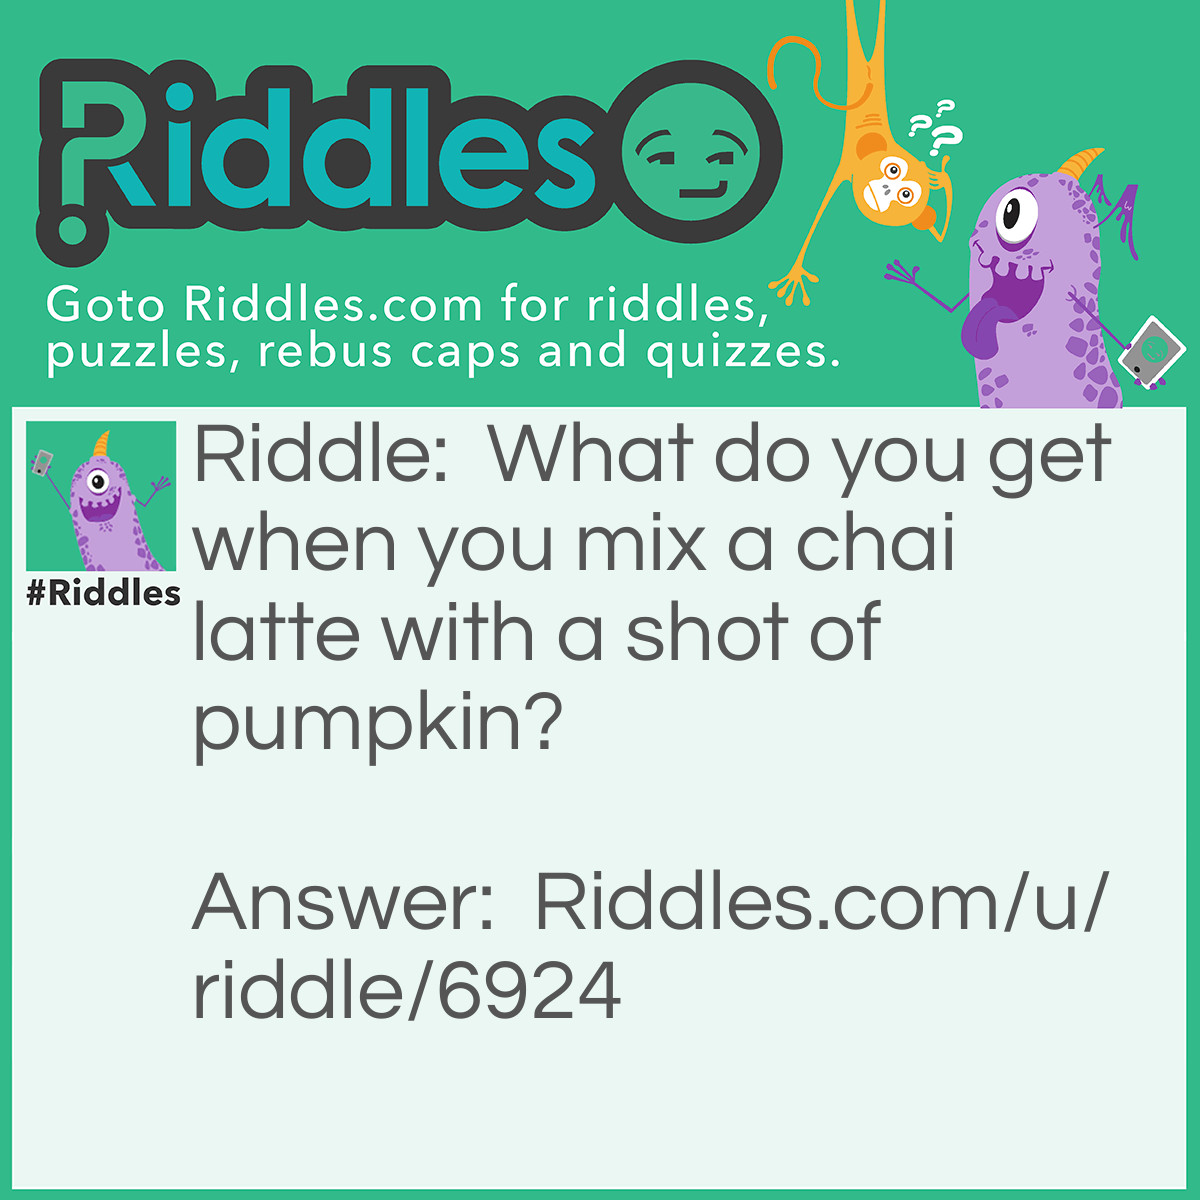 Riddle: What do you get when you mix a chai latte with a shot of pumpkin? Answer: A real pumpkin spice latte. The chai is the spice. Try it!